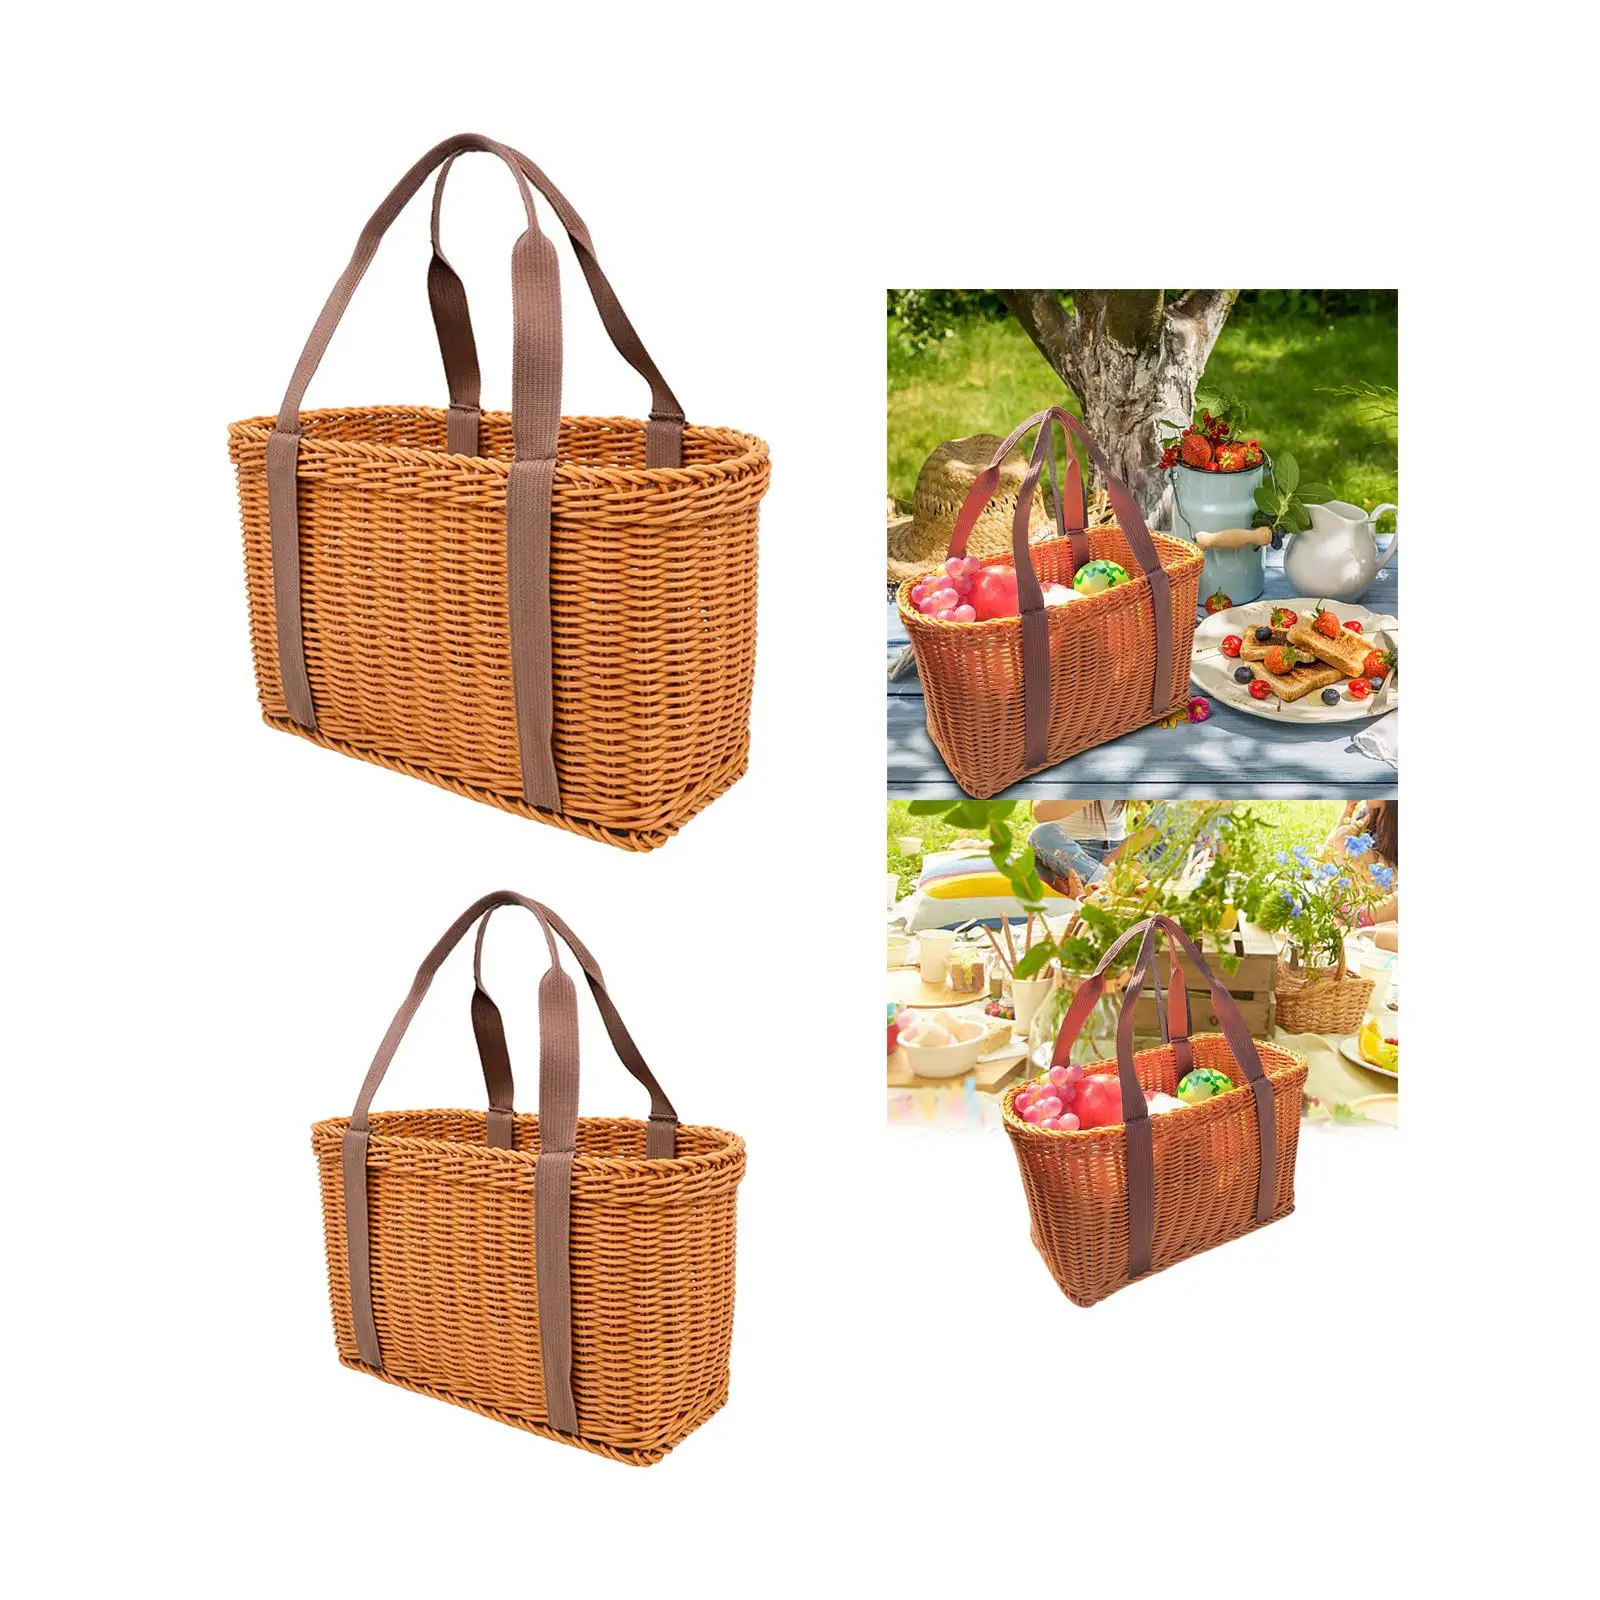 Woven Basket Storage Serving Basket Multipurpose Reusable Container Woven Grocery Bag Picnic Hamper for Beach Kitchen